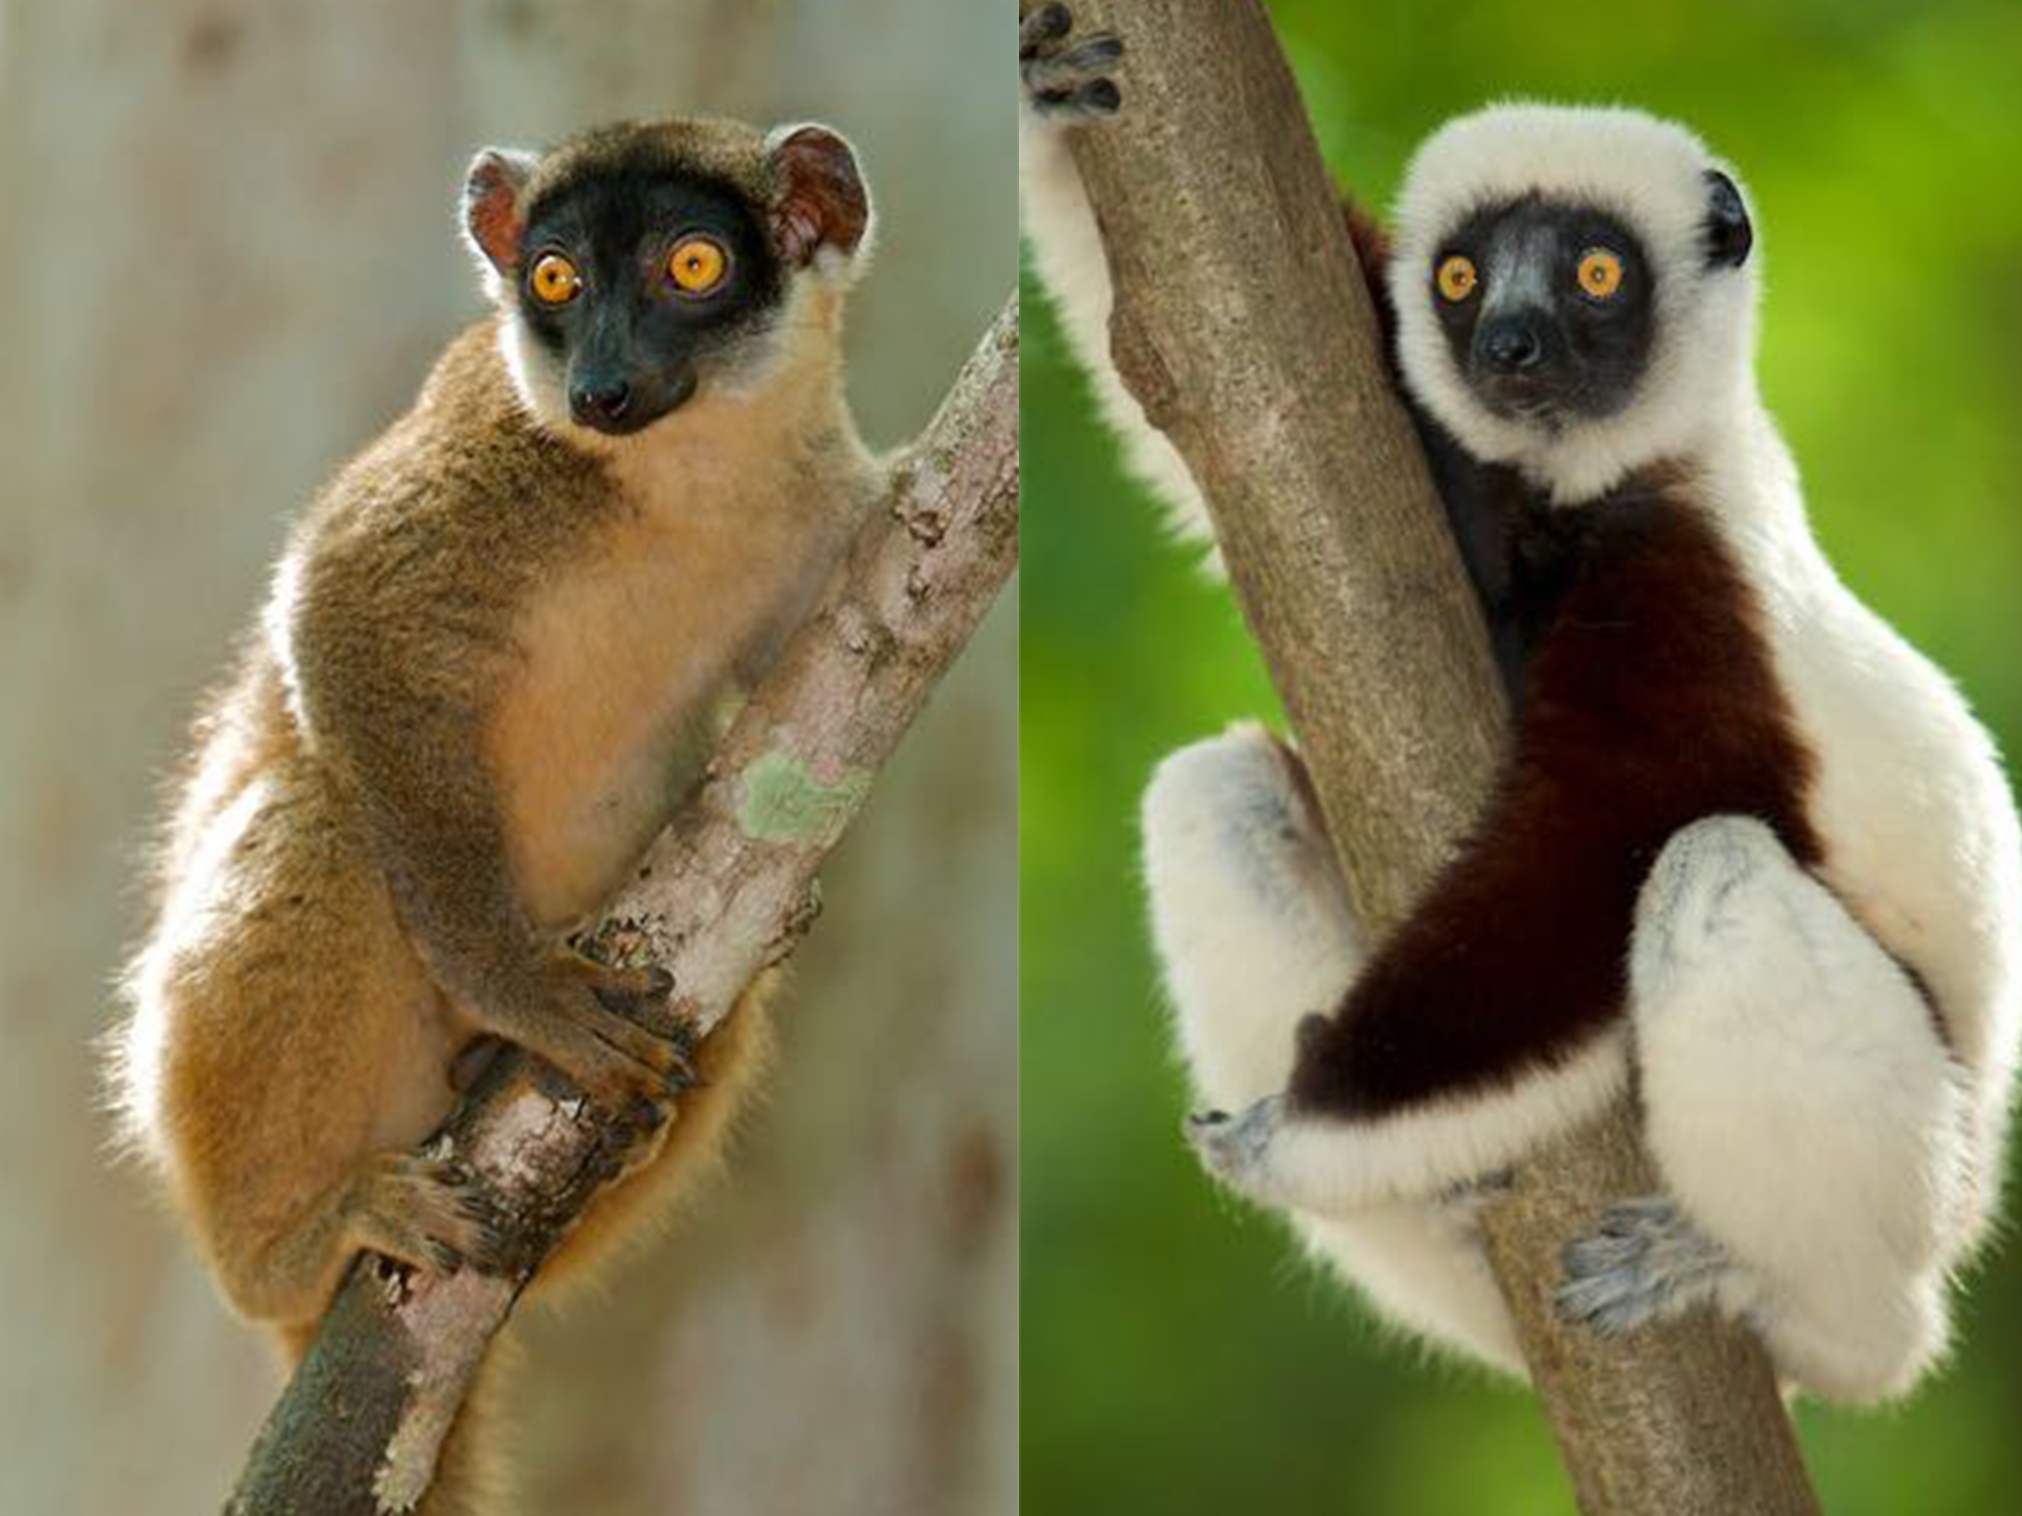 Two different species of lemurs climbing on branches